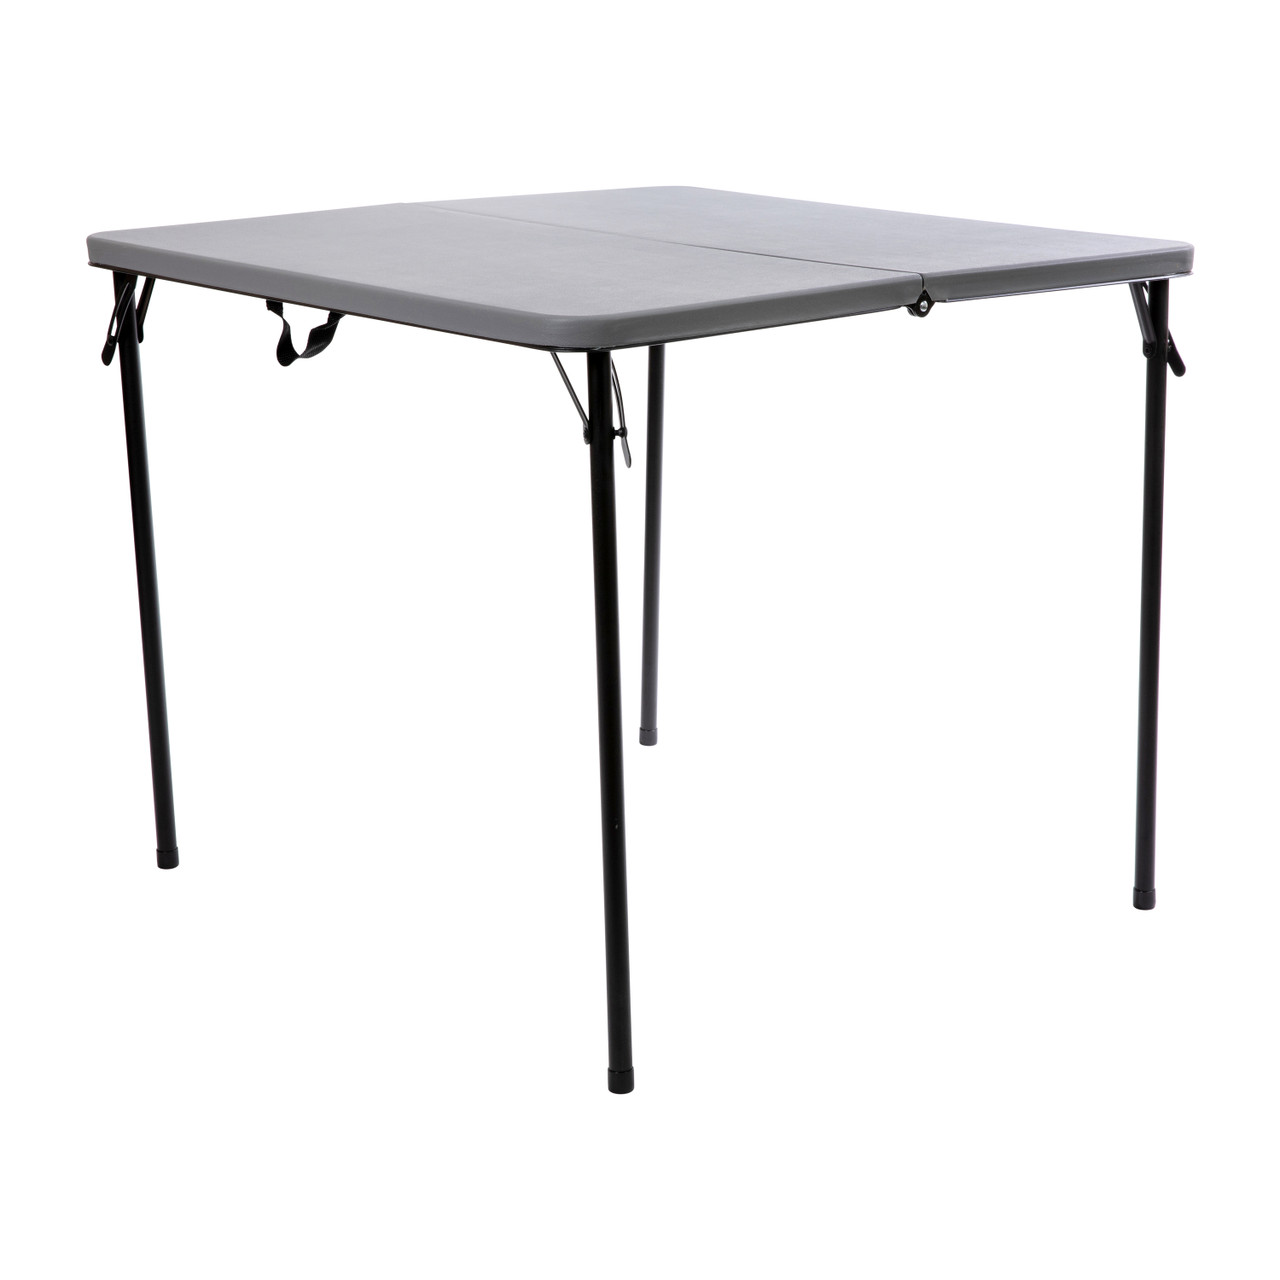 Flash Furniture 2.83-Foot Square Bi-Fold Gray Plastic Folding Table with Carrying Handle, Model# DAD-LF-86-GY-GG